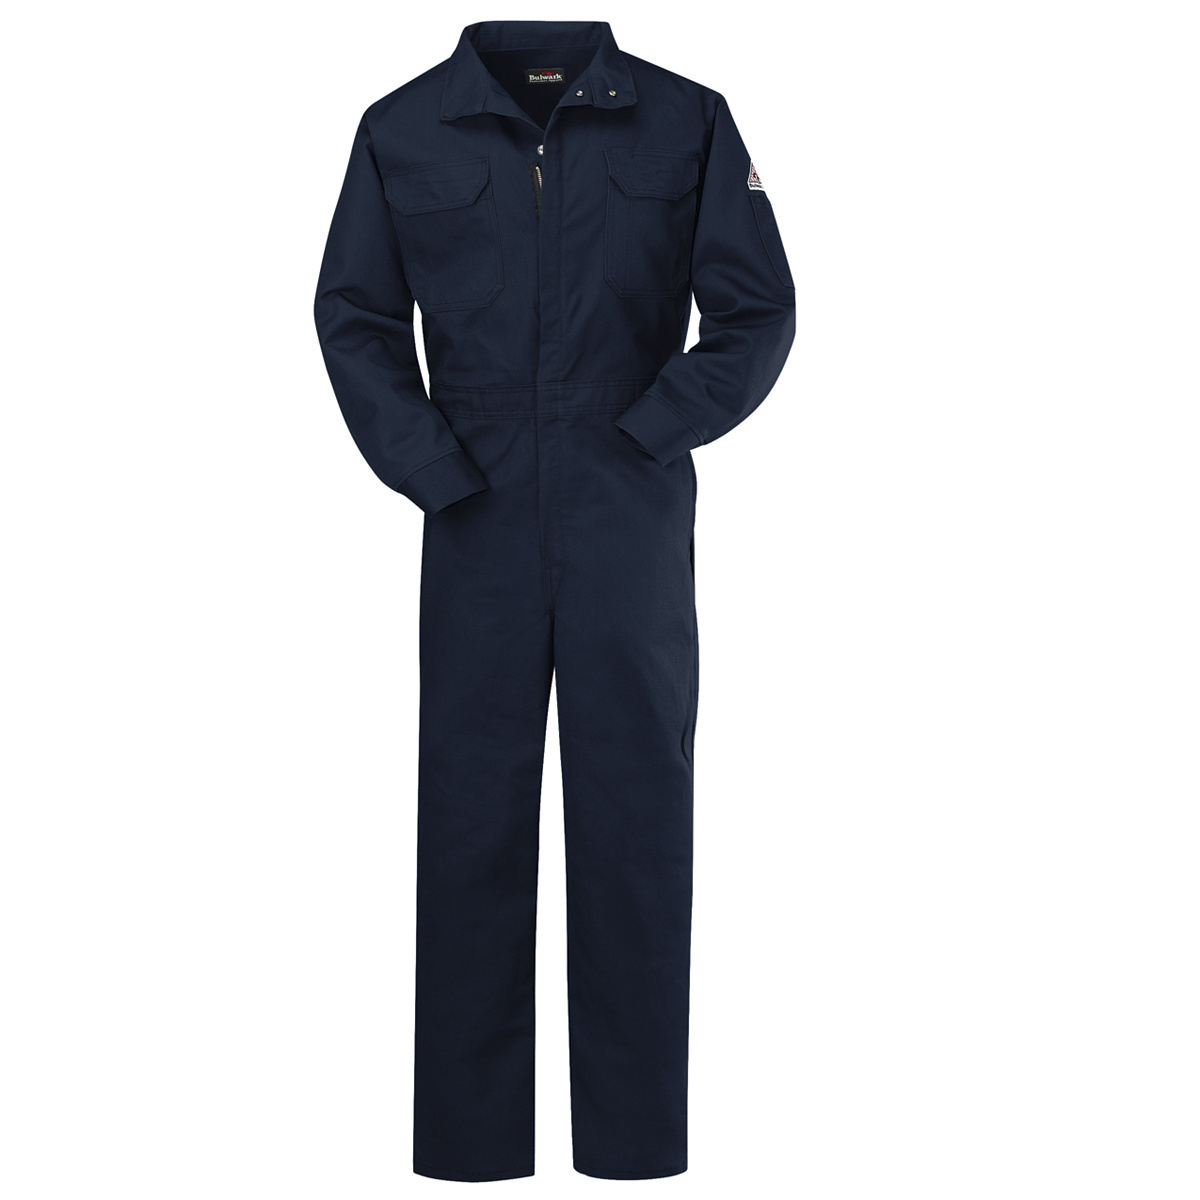 Bulwark® 56 Regular Navy Blue Westex Ultrasoft®/Cotton/Nylon Flame Resistant Coveralls With Zipper Front Closure